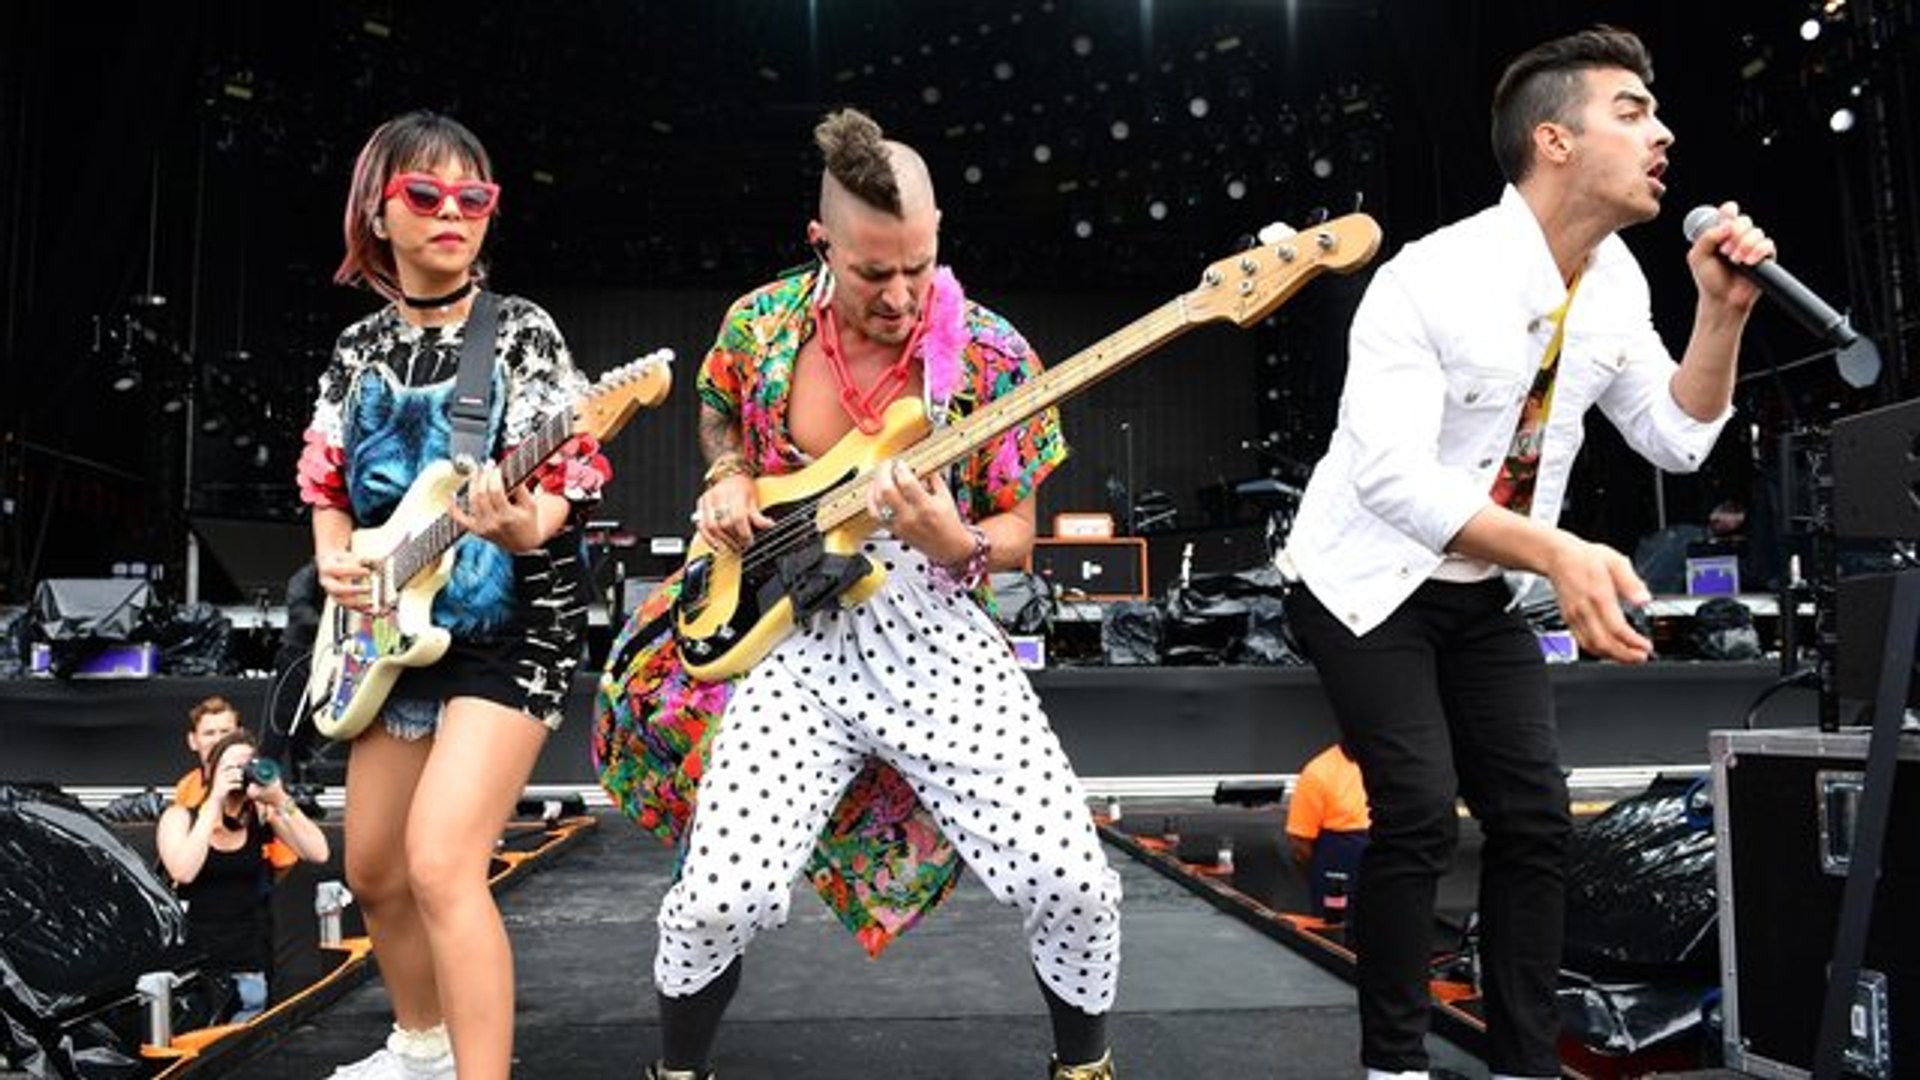 DNCE - Cake By The Ocean LIVE @ V FESTIVAL 2016 - video Dailymotion